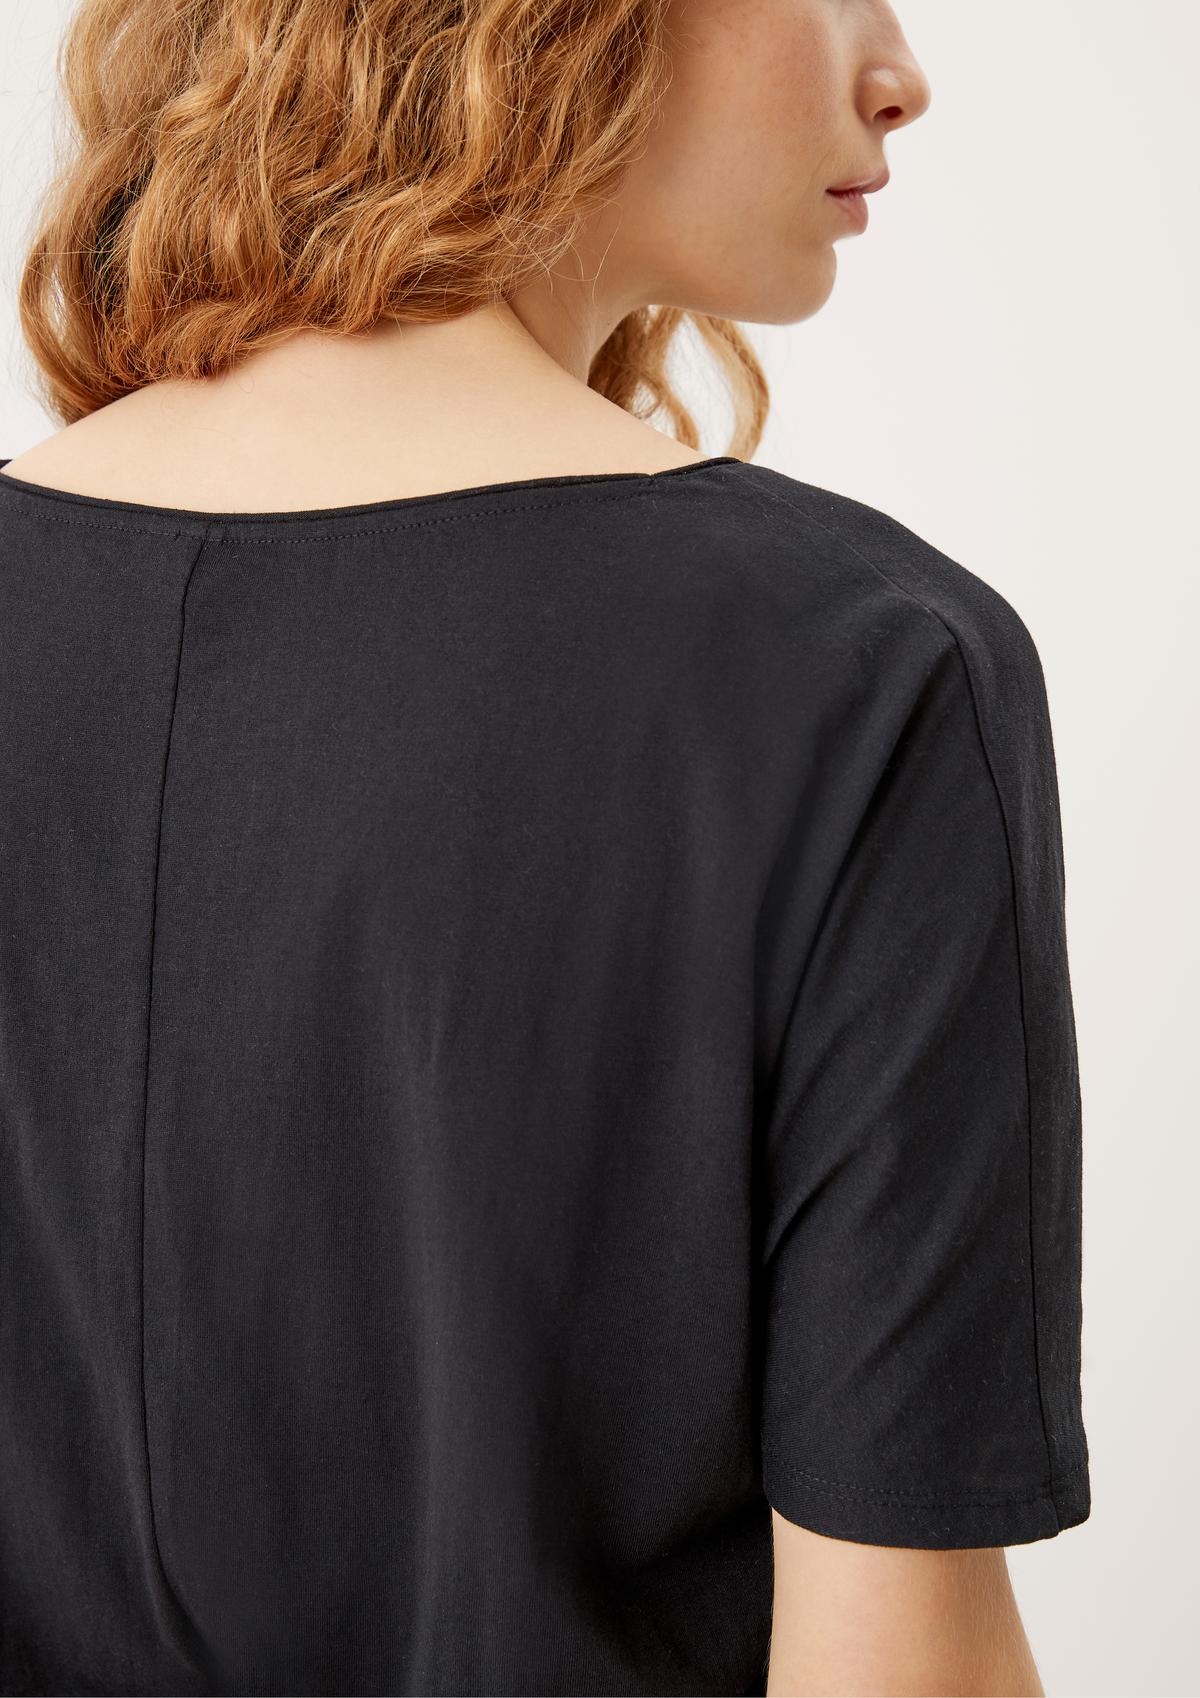 s.Oliver Cotton blend jersey top